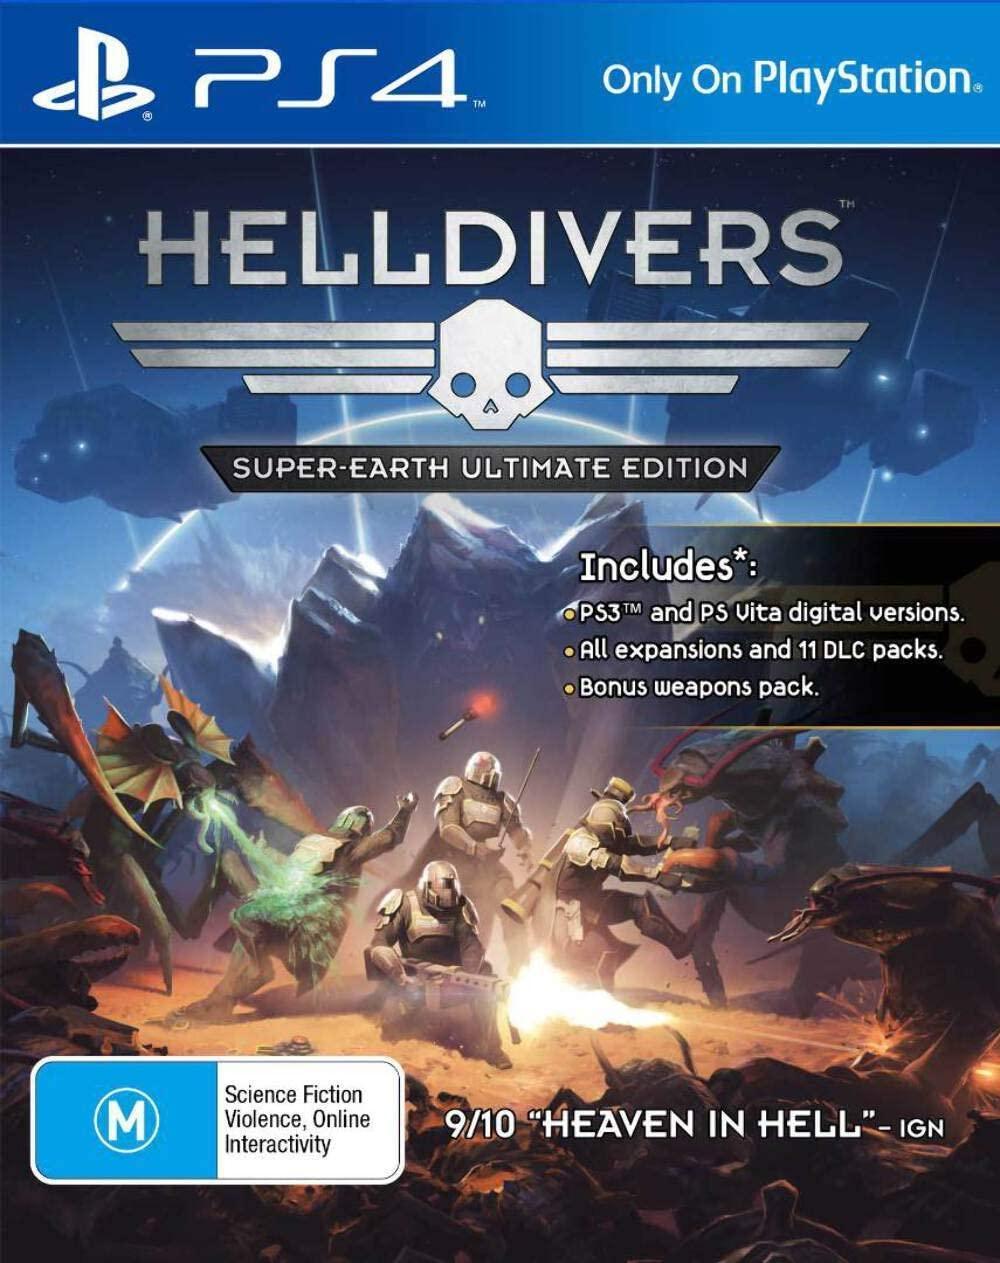 Helldivers Super-Earth Ultimate Edition - Playstation 4 - GD Games 